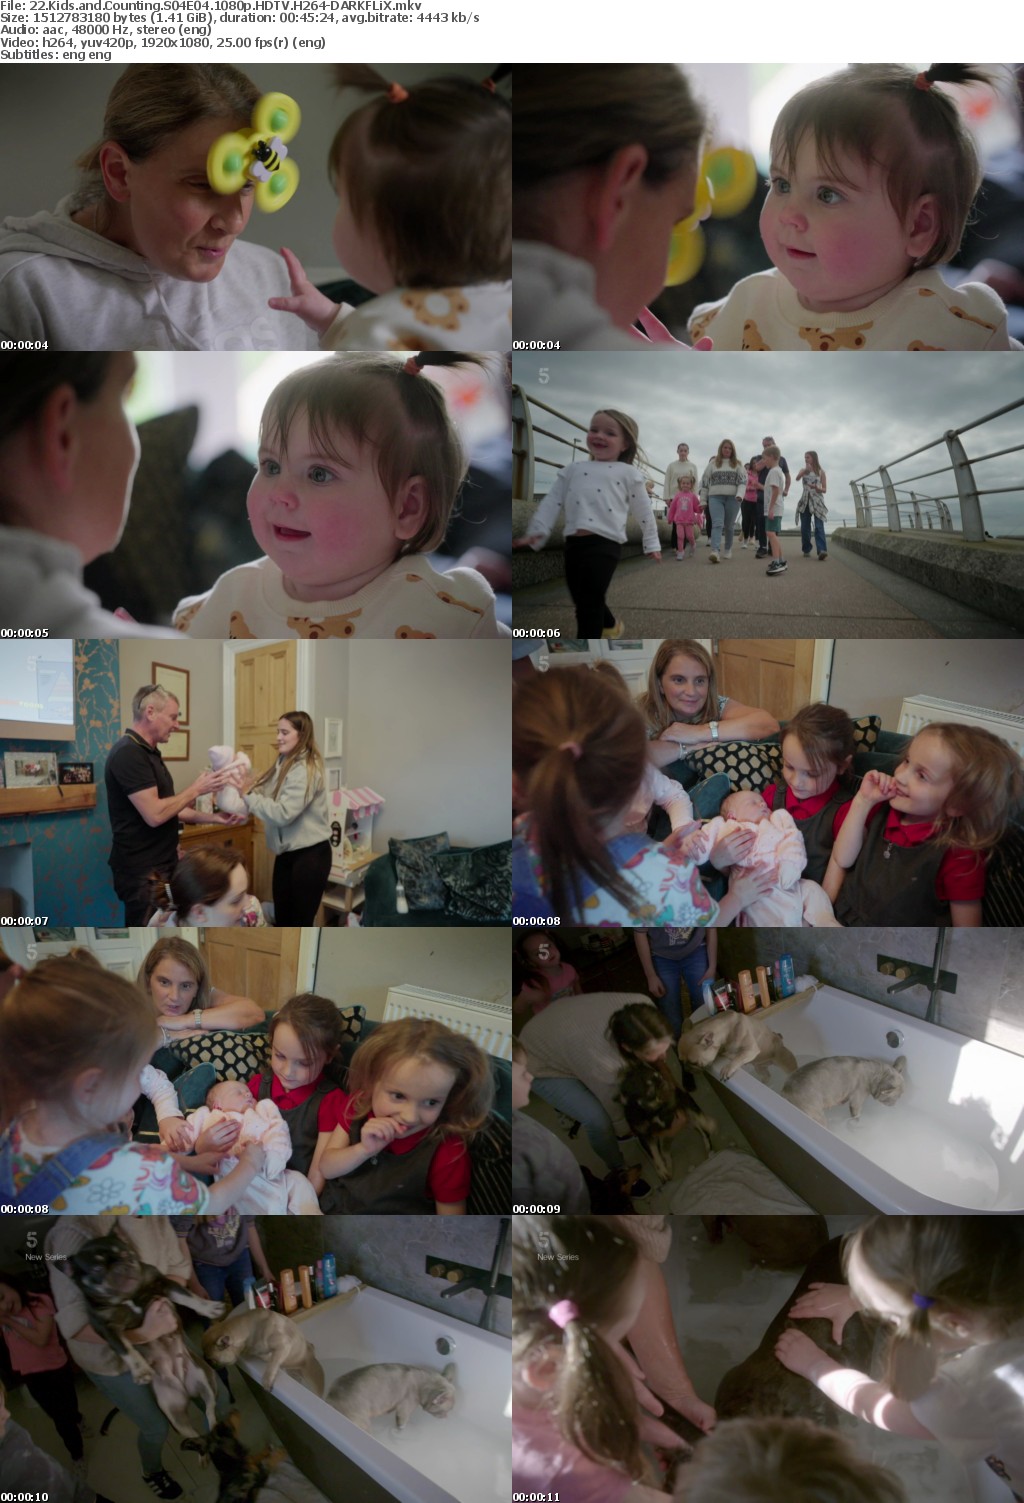 22 Kids and Counting S04E04 1080p HDTV H264-DARKFLiX